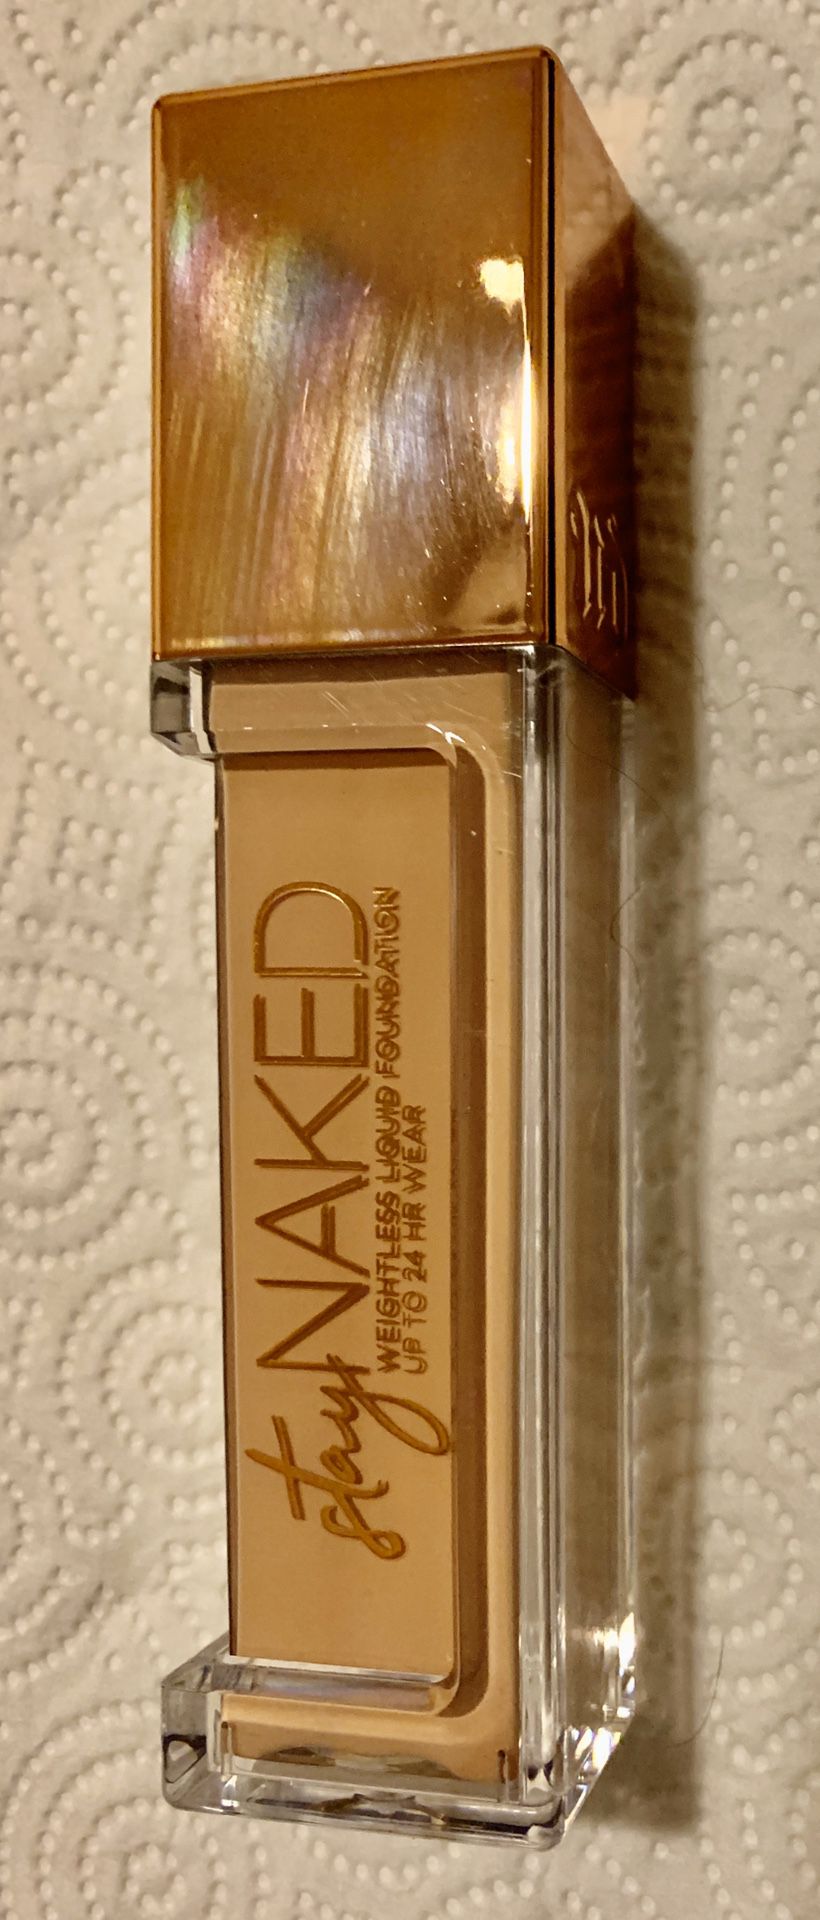 NEW Urban Decay Stay Naked Weightless Foundation